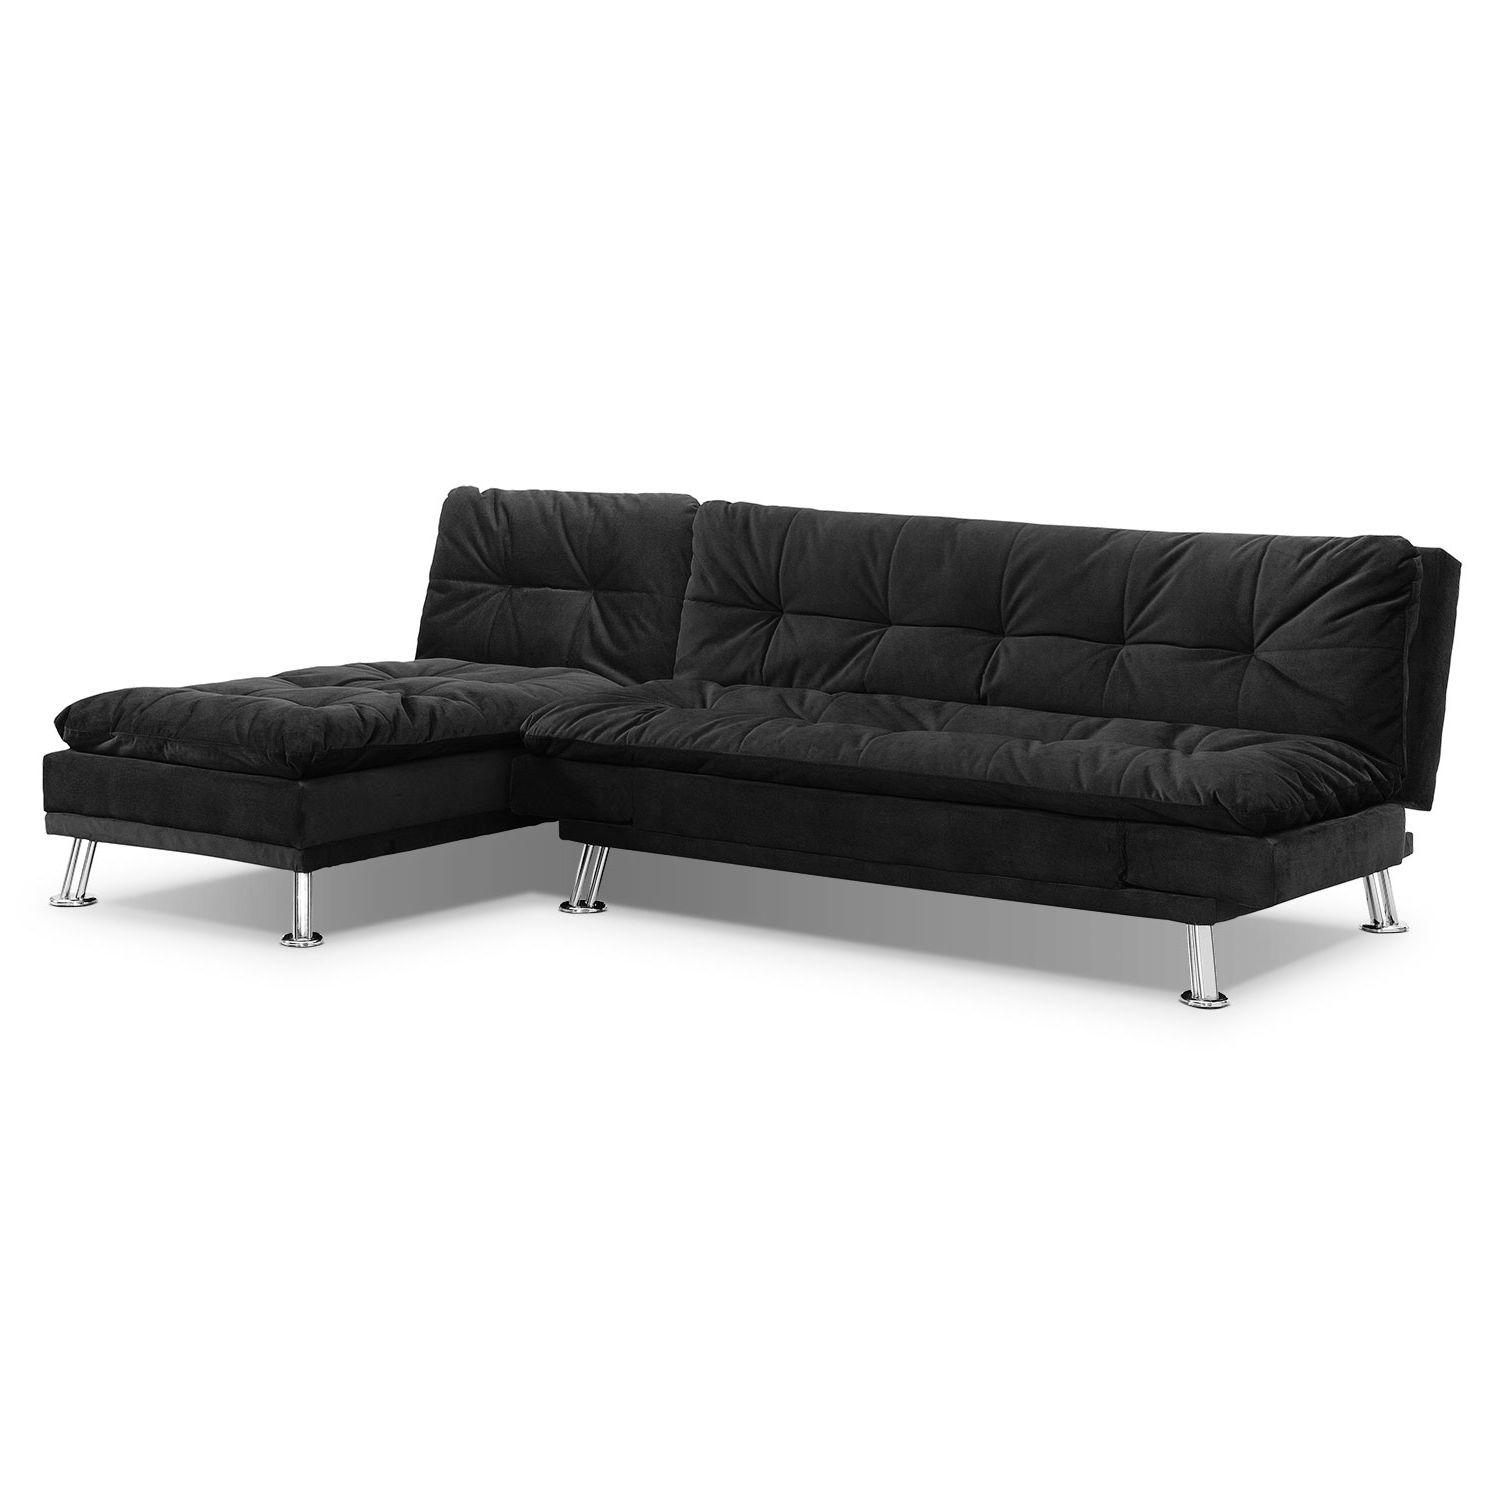 Futon Chaises With Regard To Well Known Waltz Futon Sofa Bed With Chaise – Black (View 14 of 15)